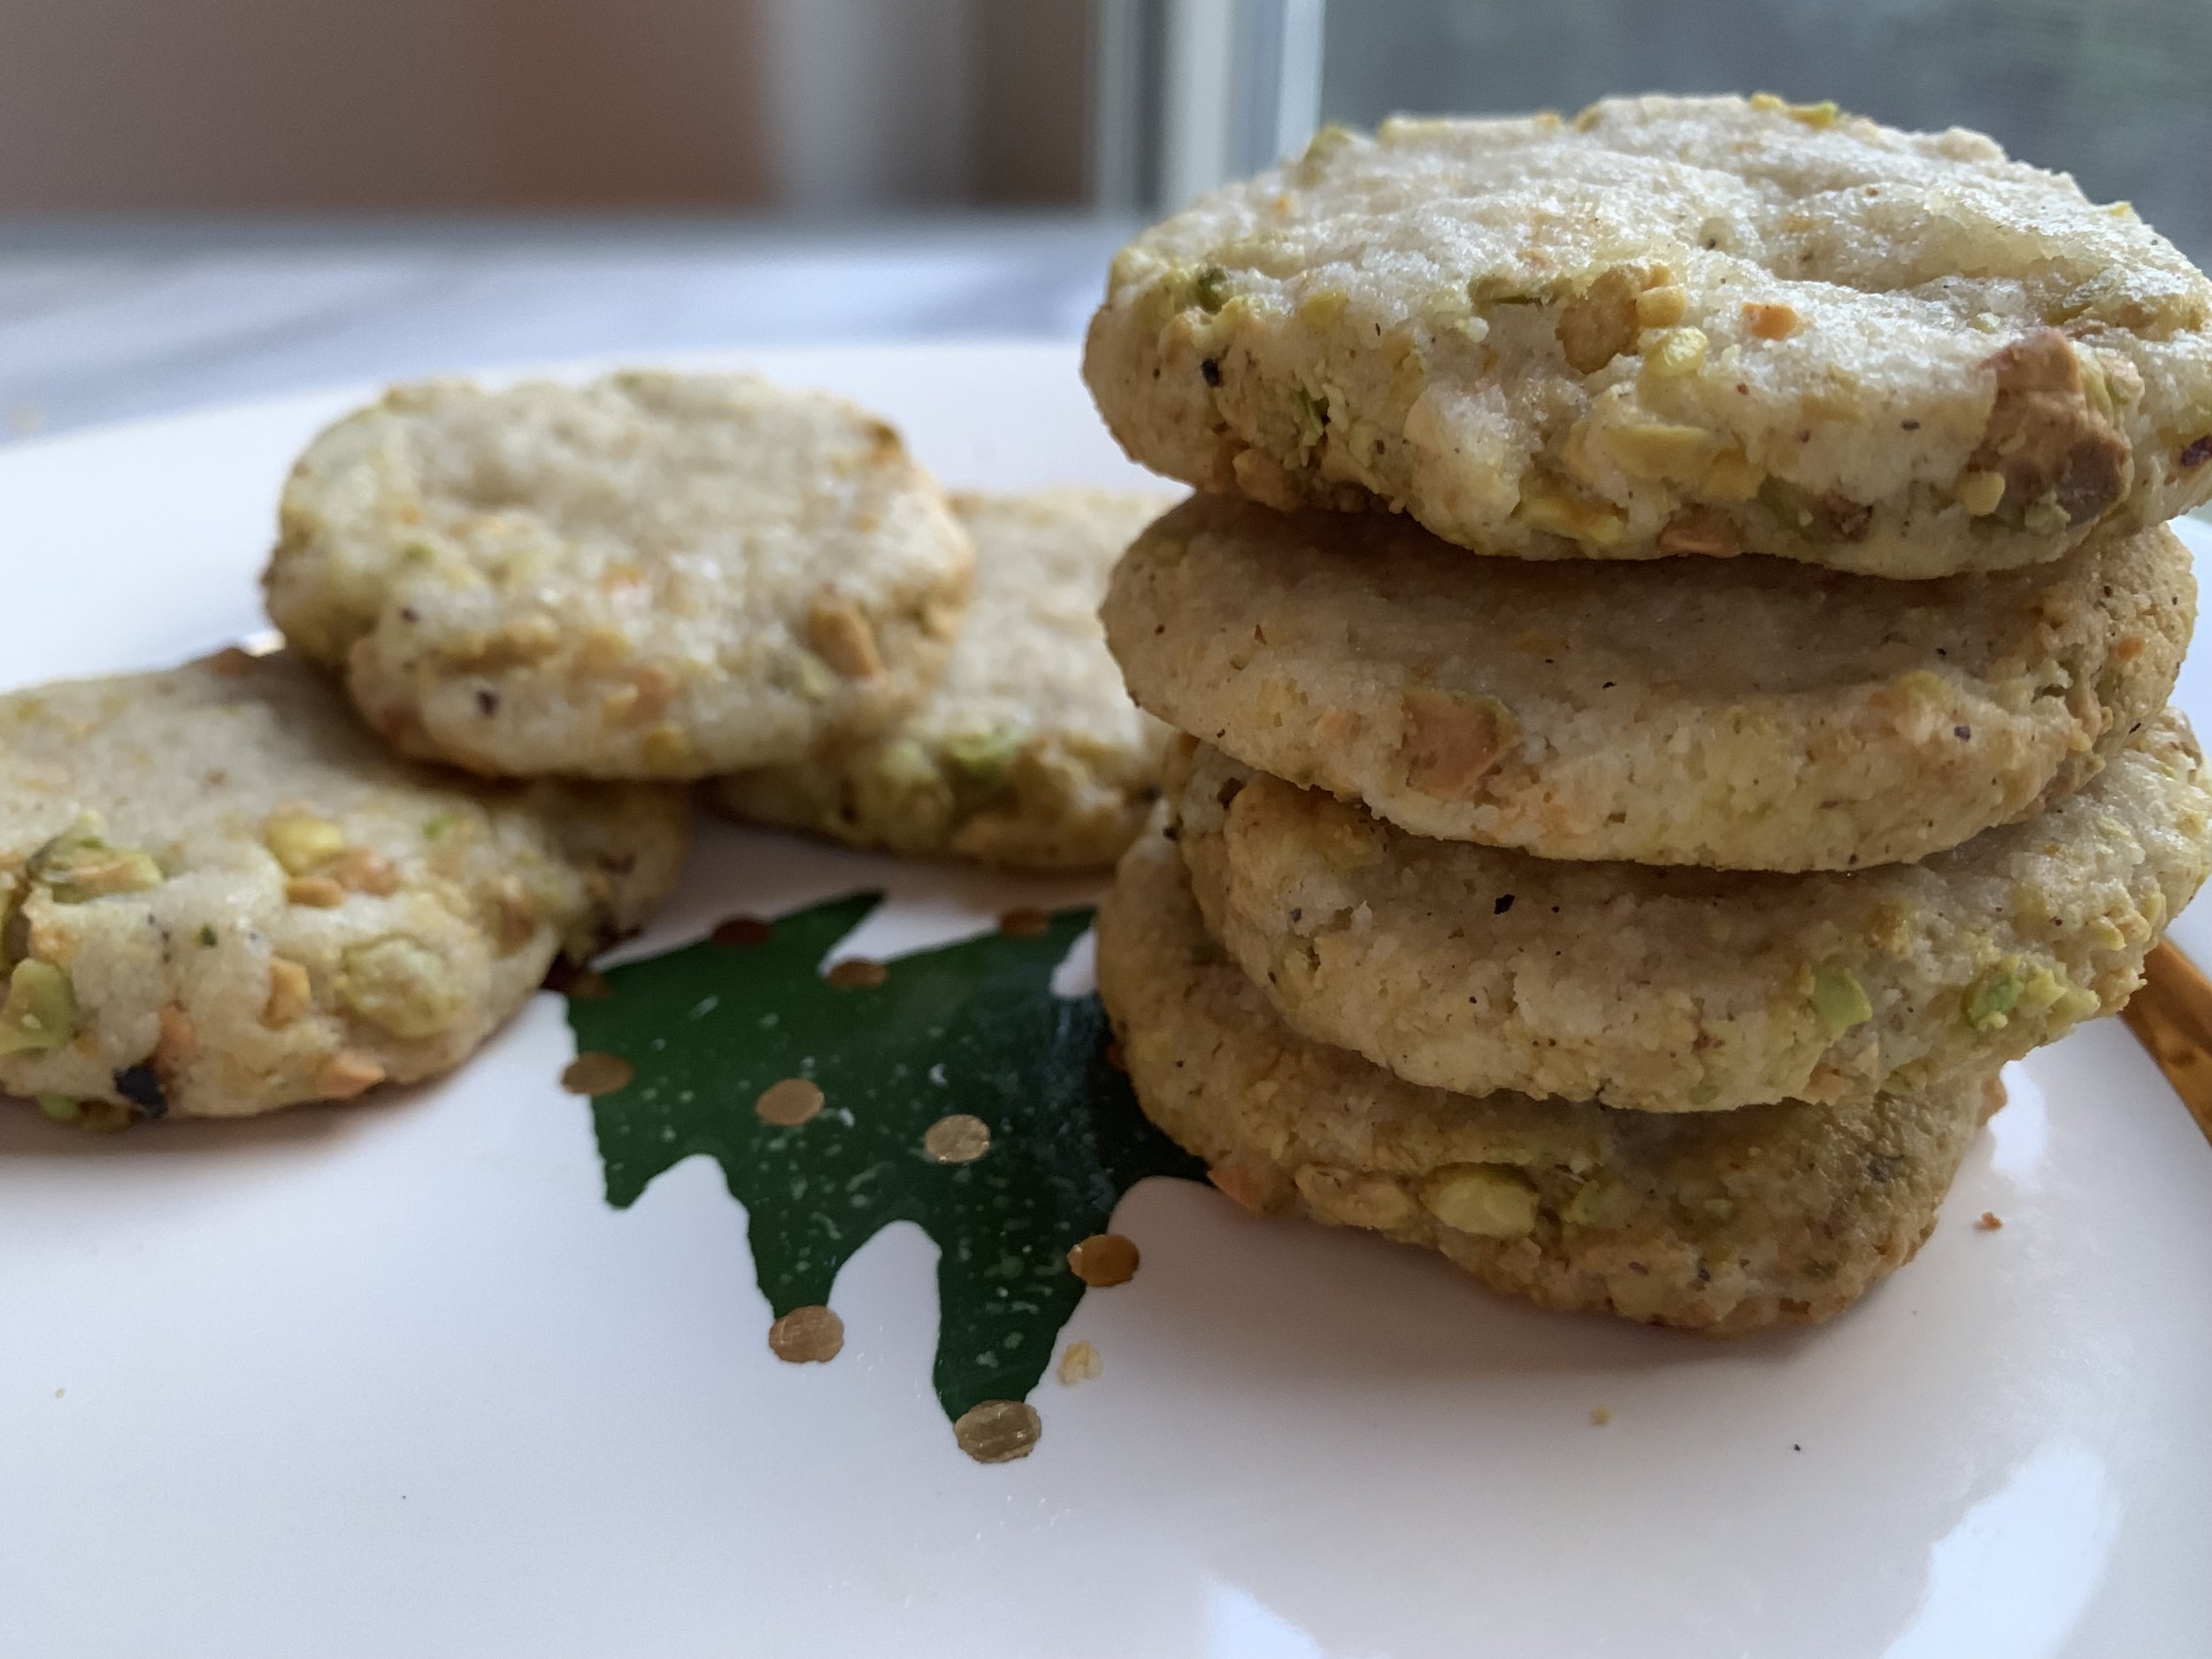 Flourless Almond Cookies with Cardamom, Orange Zest, and